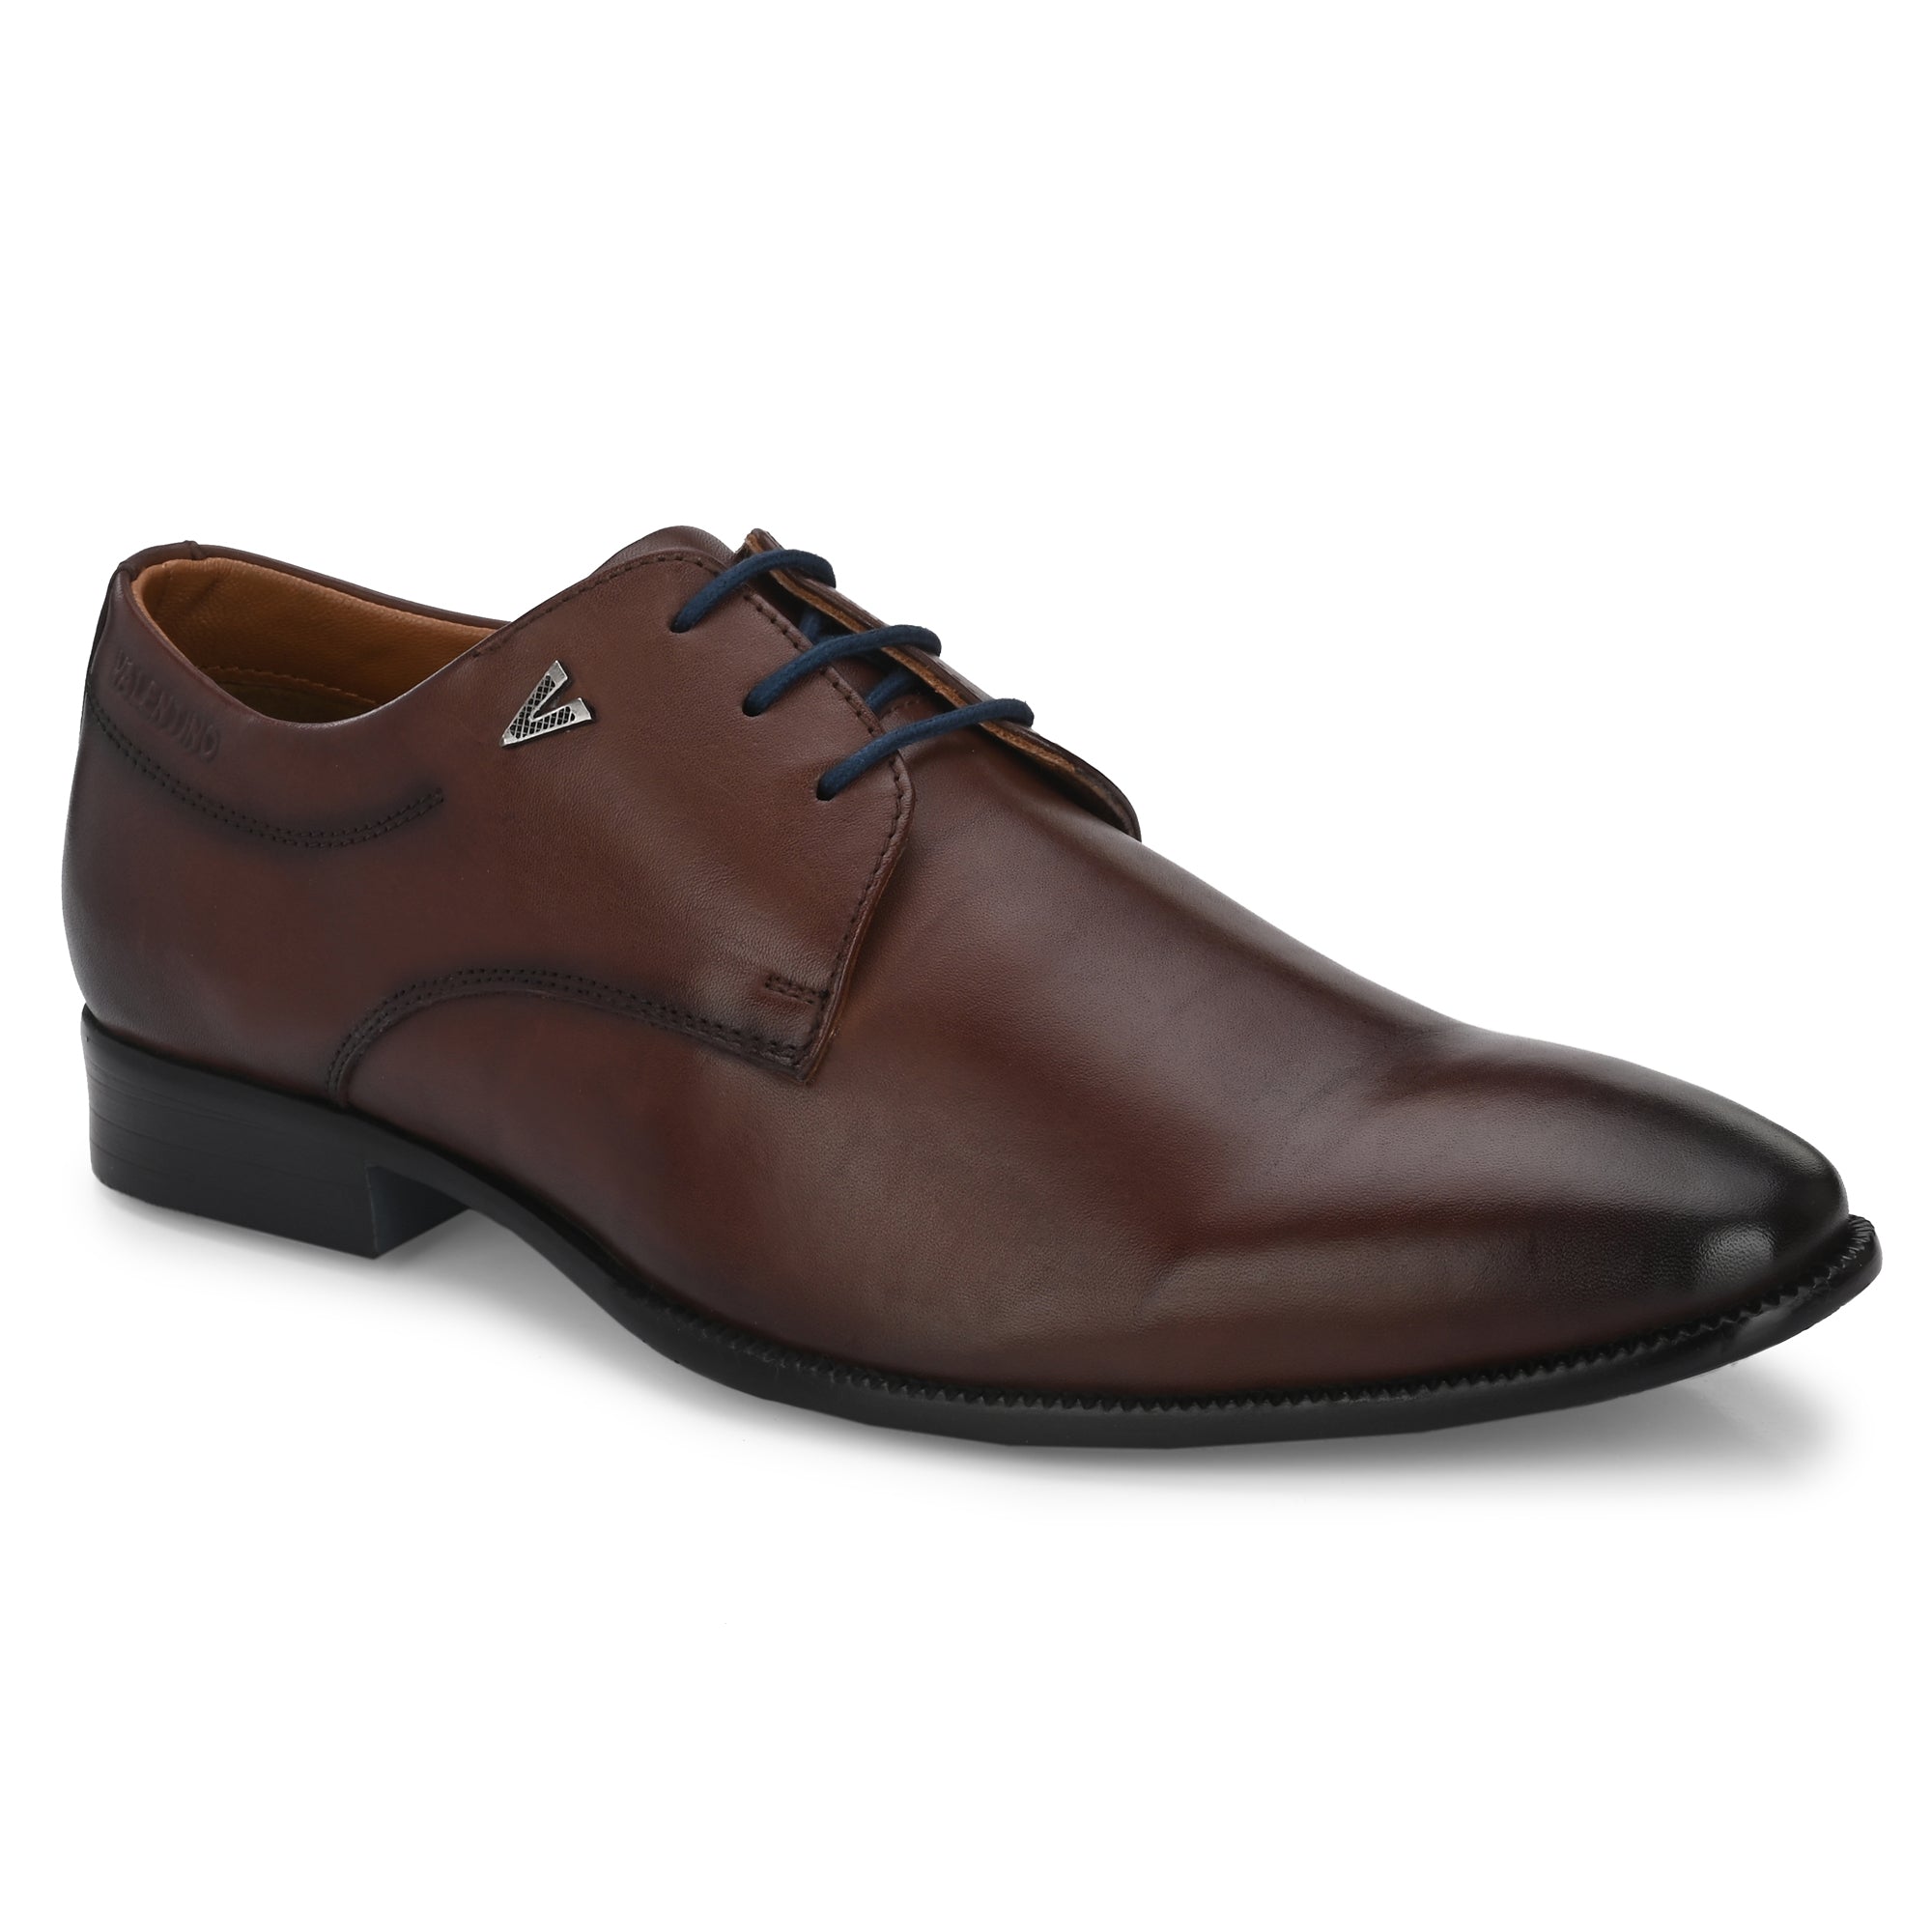 ATTITUDE-51 MEN LEATHER BROWN FORMAL LACE UP DERBY